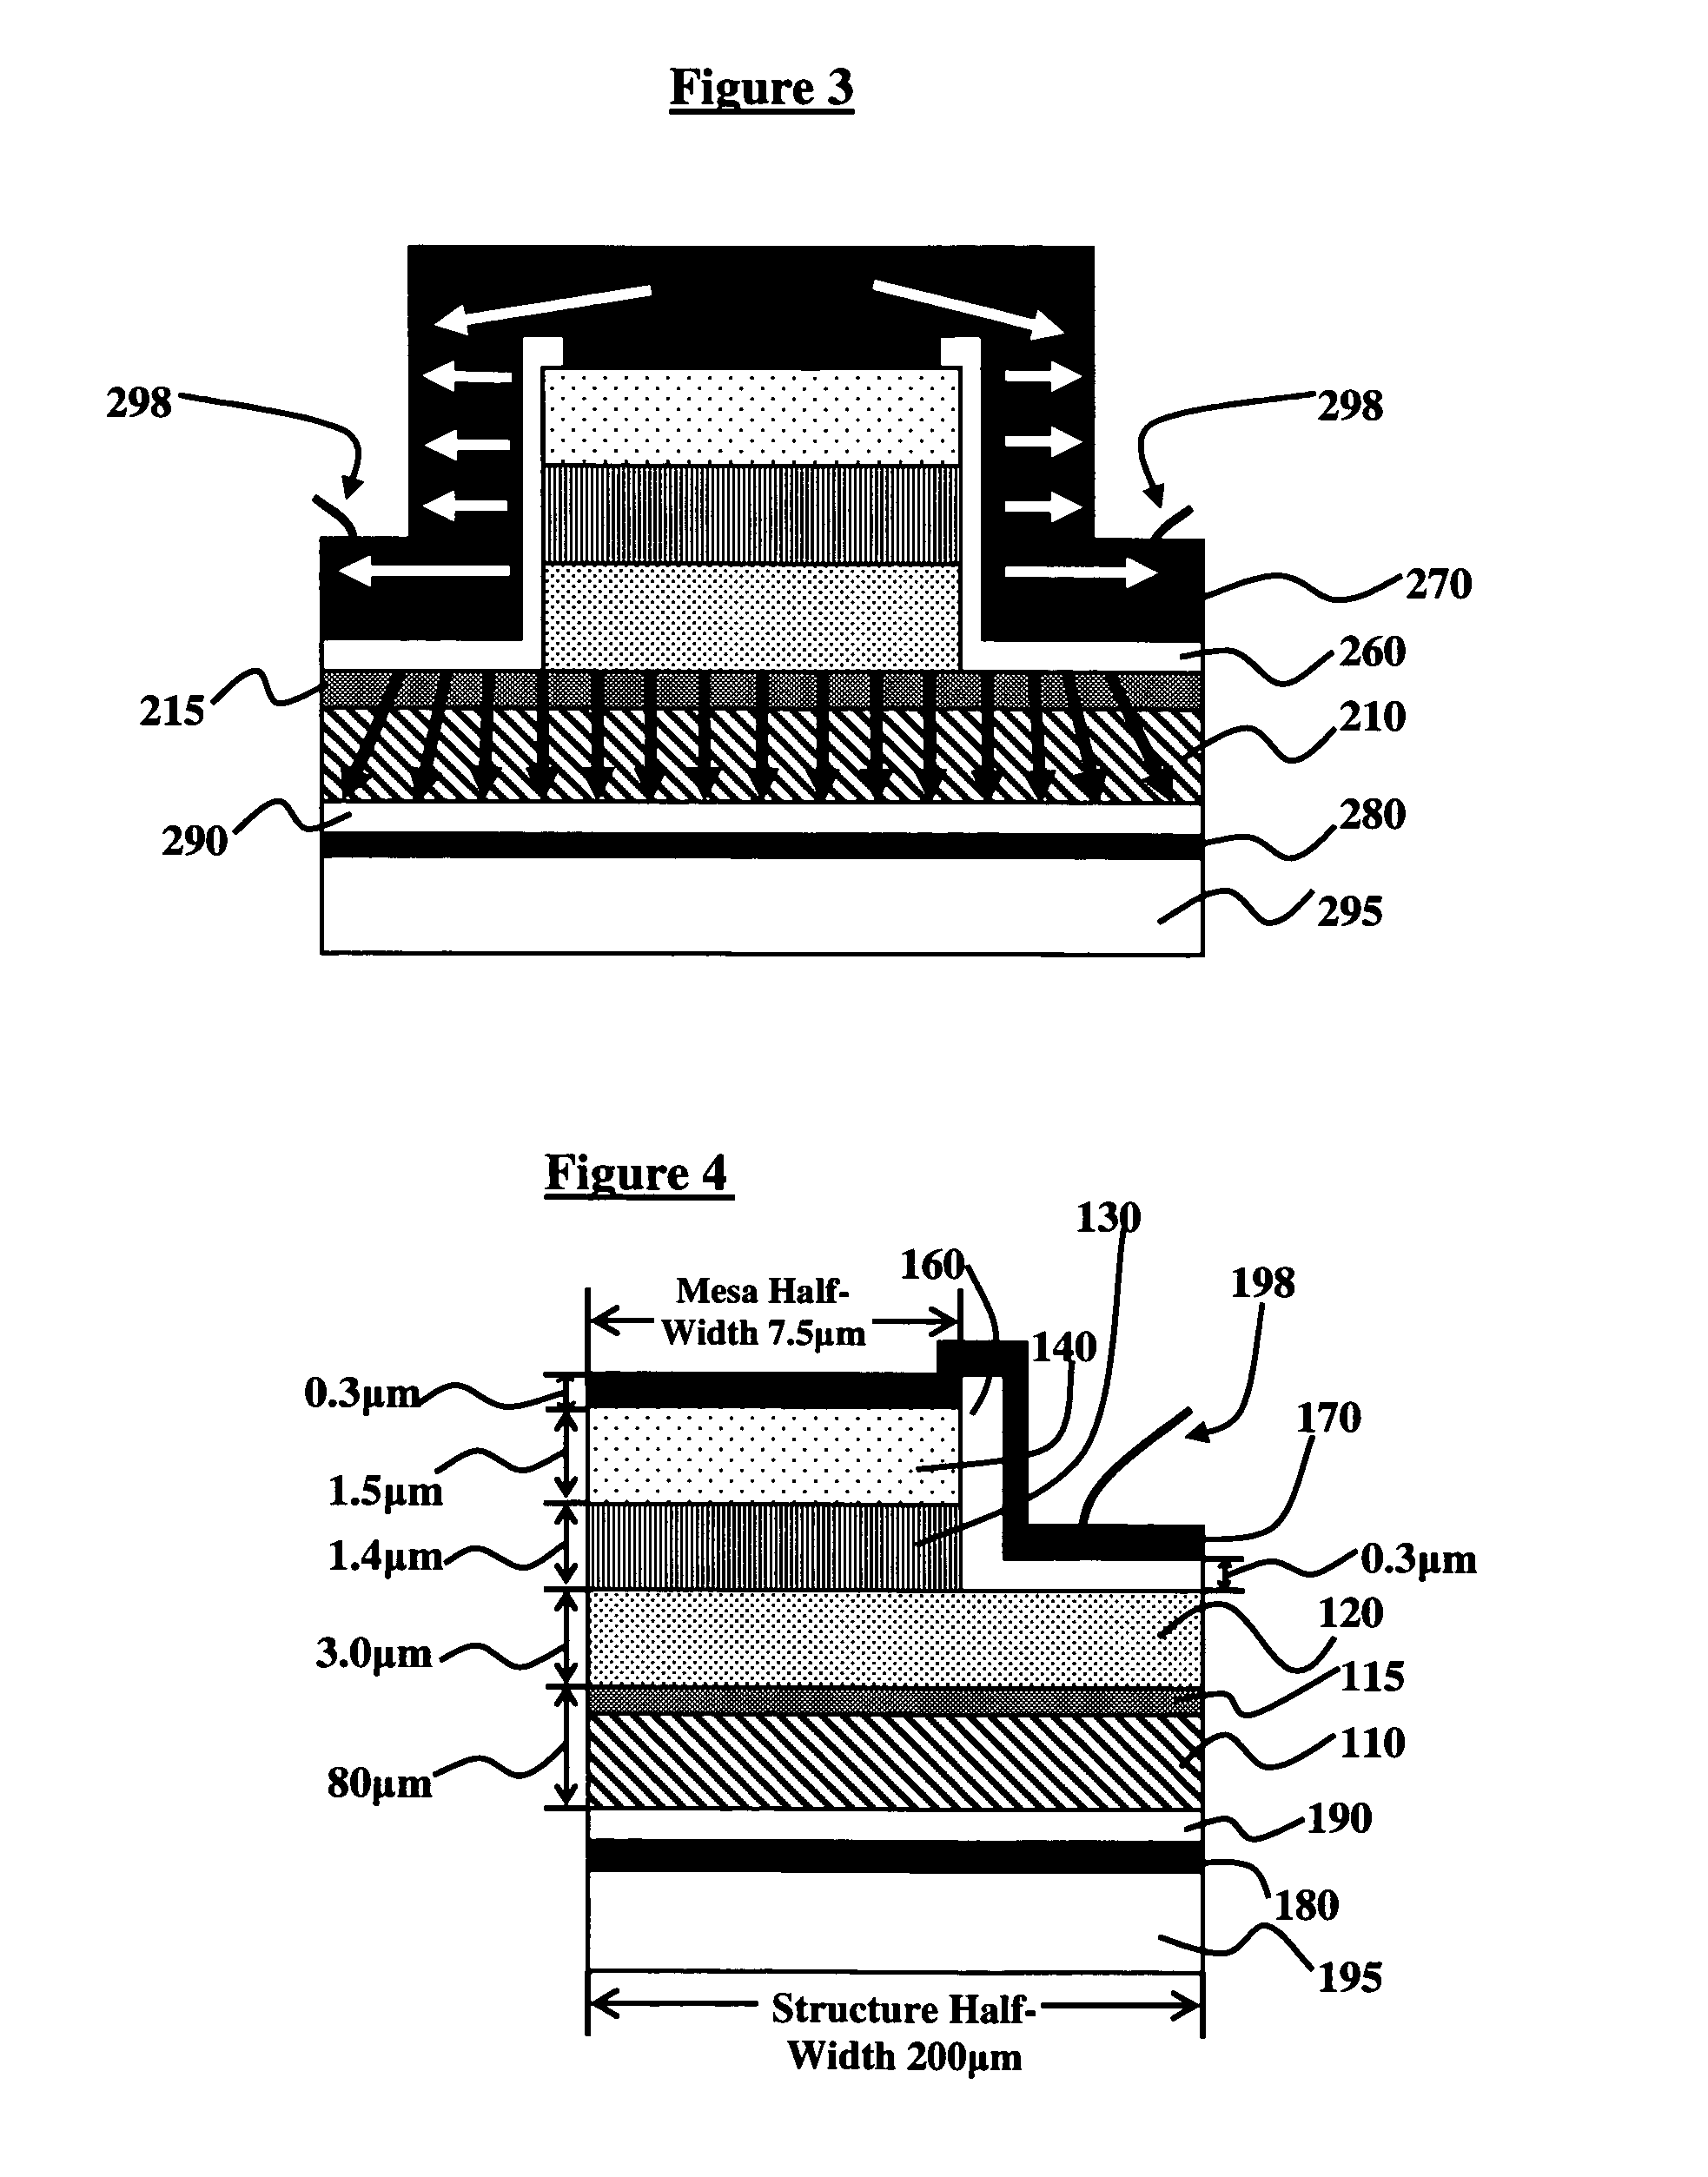 Lateral heat spreading layers for epi-side up ridge waveguide semiconductor lasers